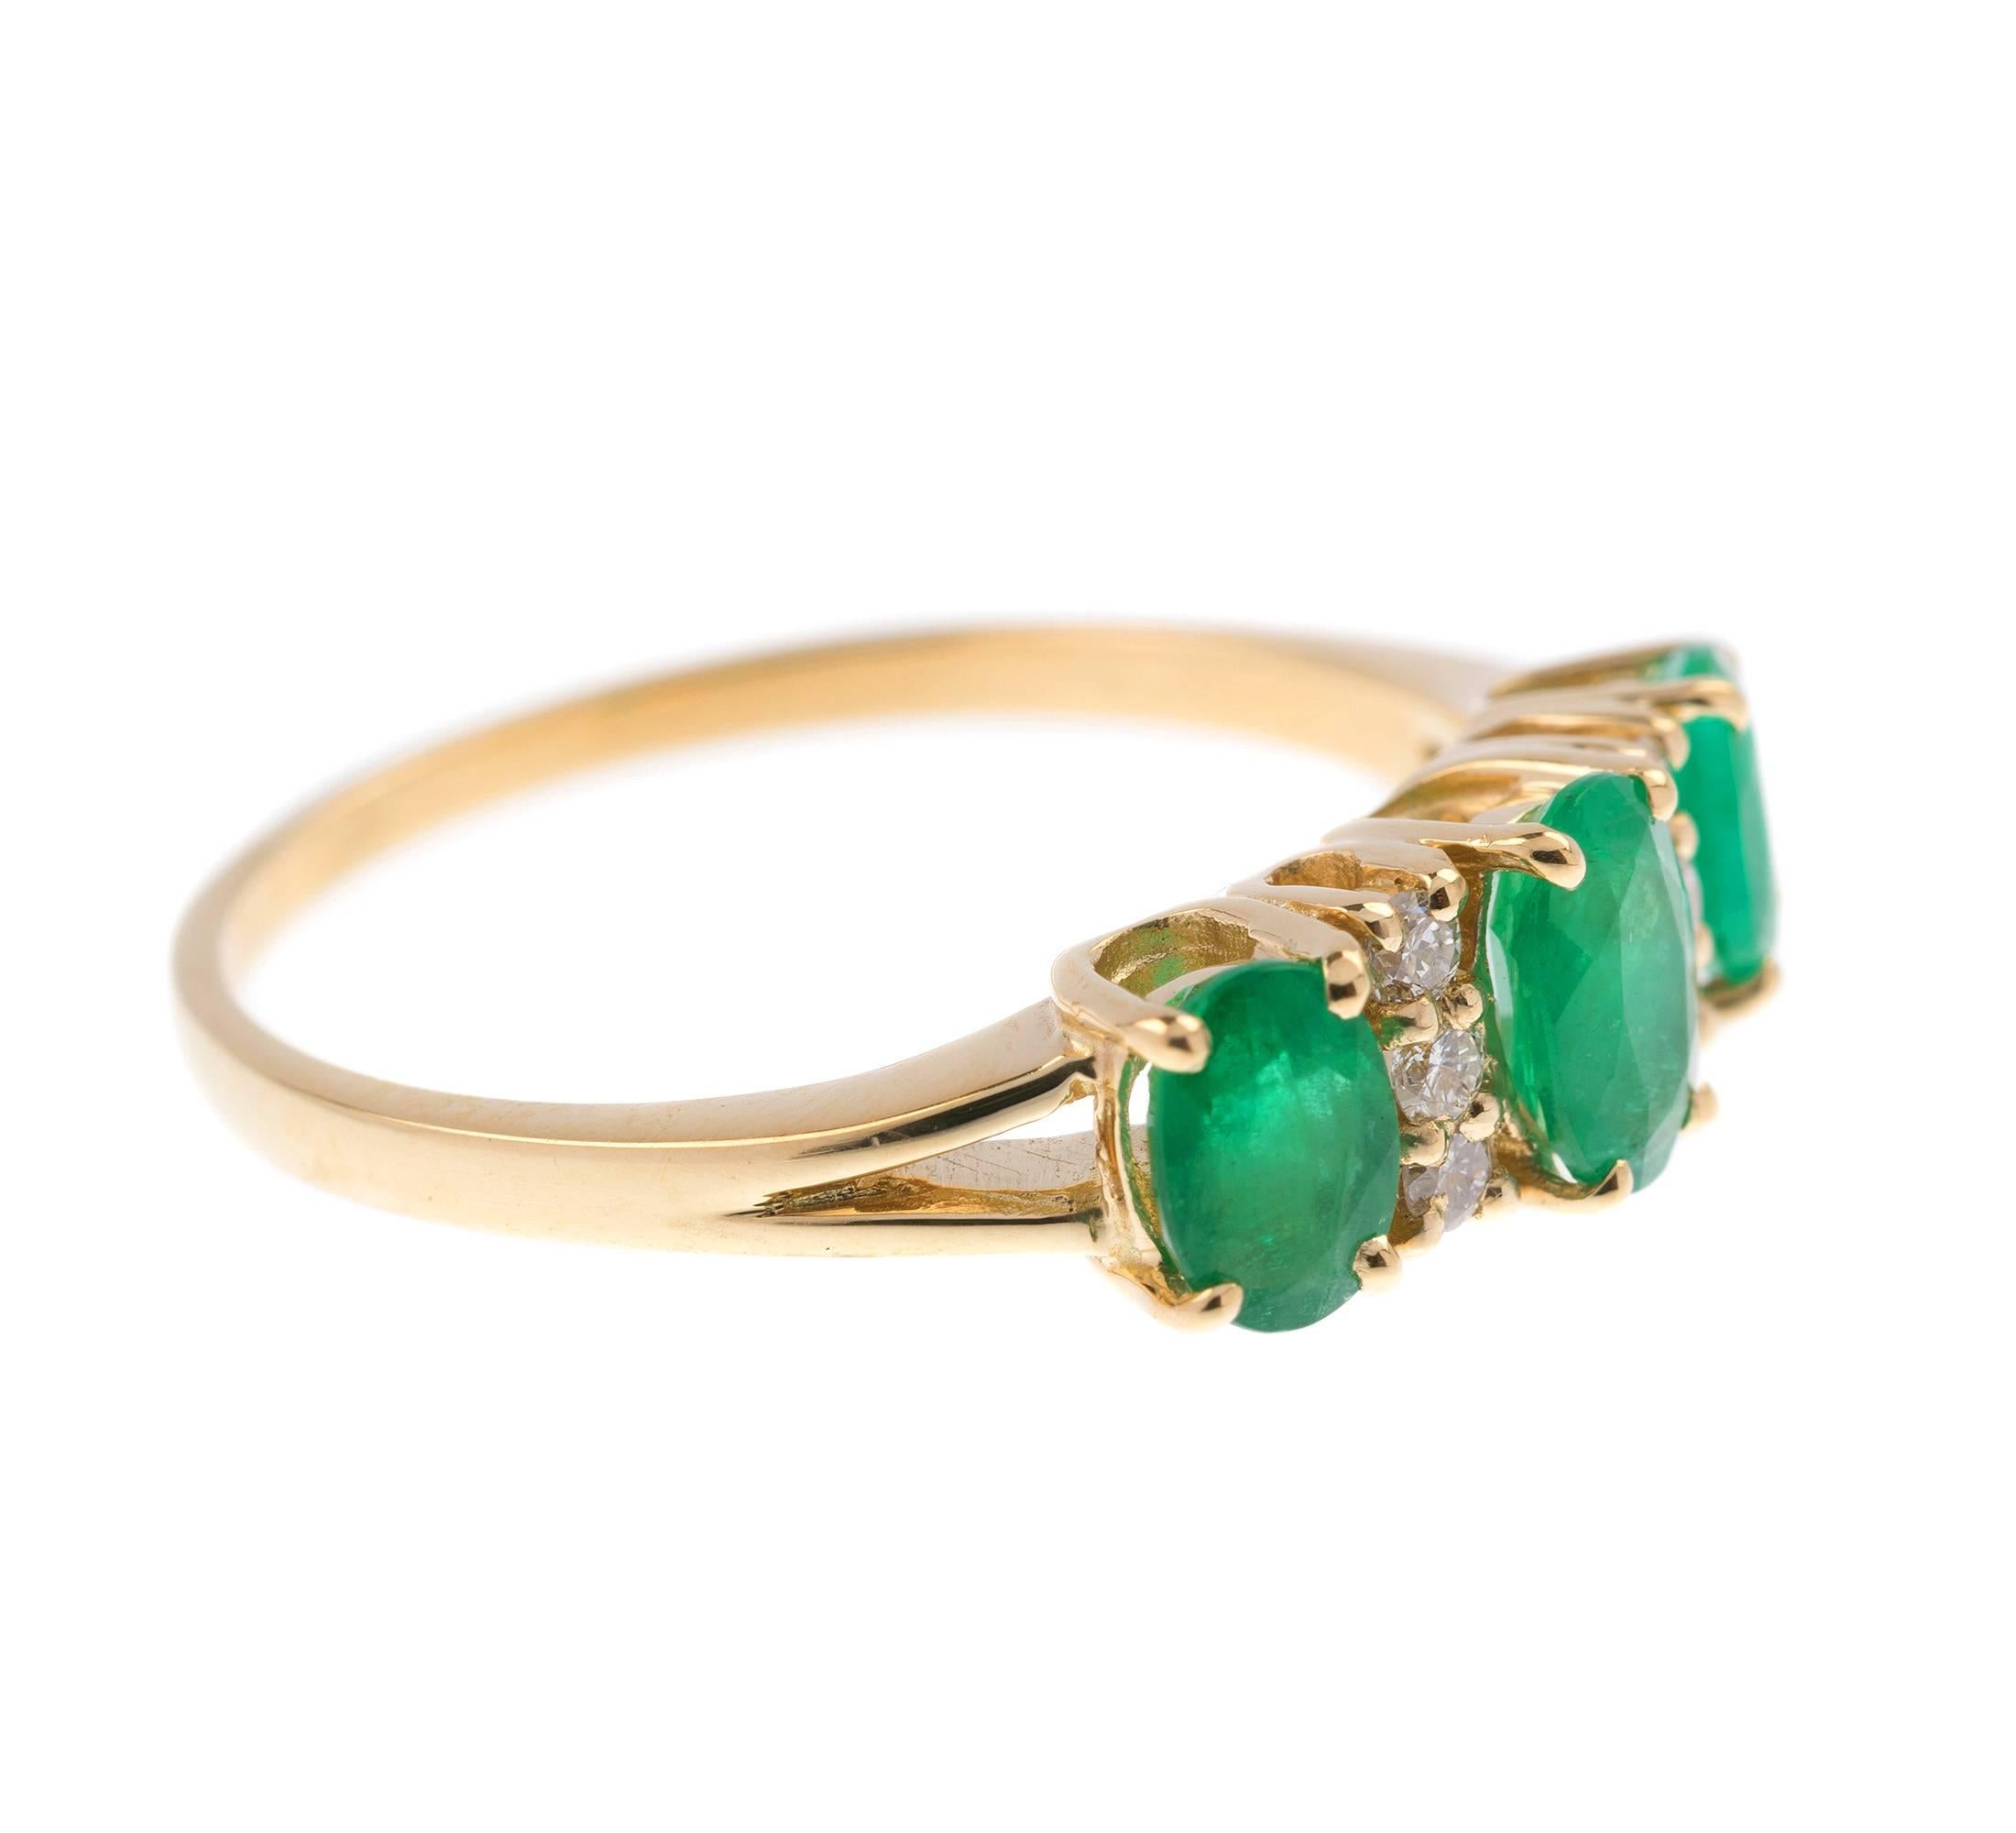 GEMMOLOGIST'S NOTES
This gorgeous ring, enhanced with three gorgeous vivid emeralds, interspaced by sparkling brilliant cut diamond lines. The lovely combination of gemstones that is both elegant and glamorous.

A simply beautiful righthand dress